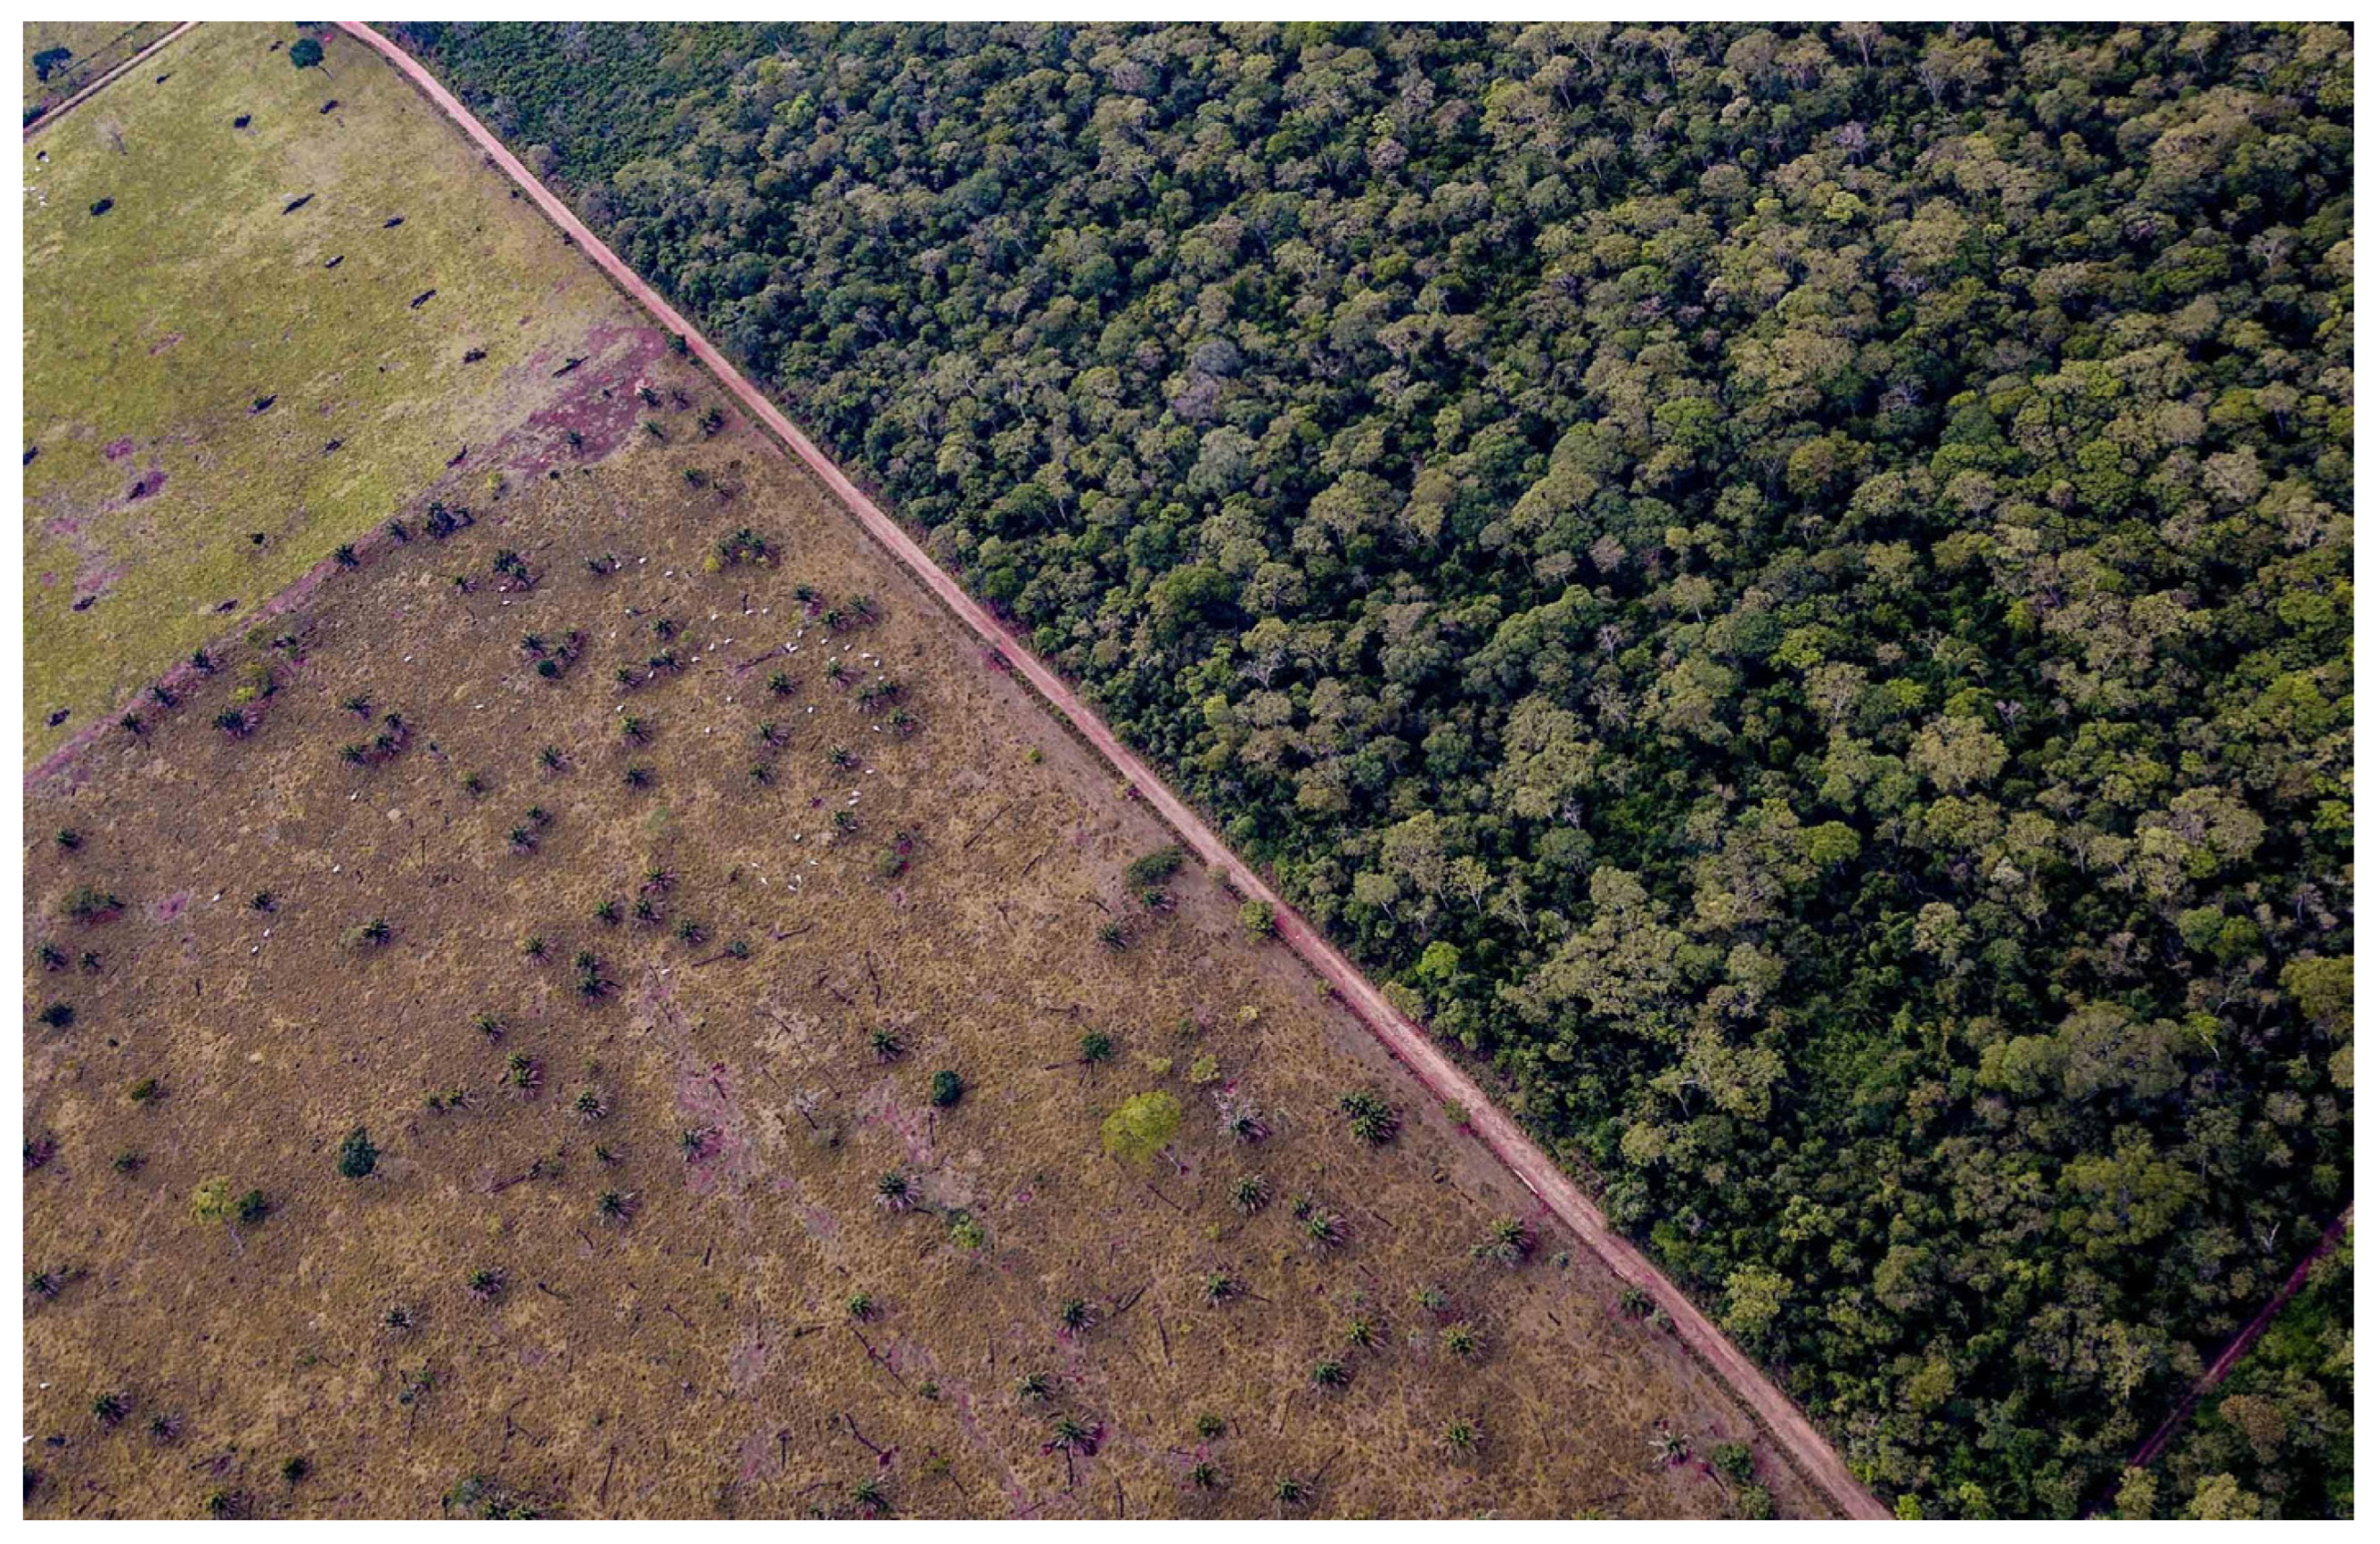 Land | Free Full-Text | Effect of Deforestation on Land Surface Temperature  in the Chiquitania Region, Bolivia